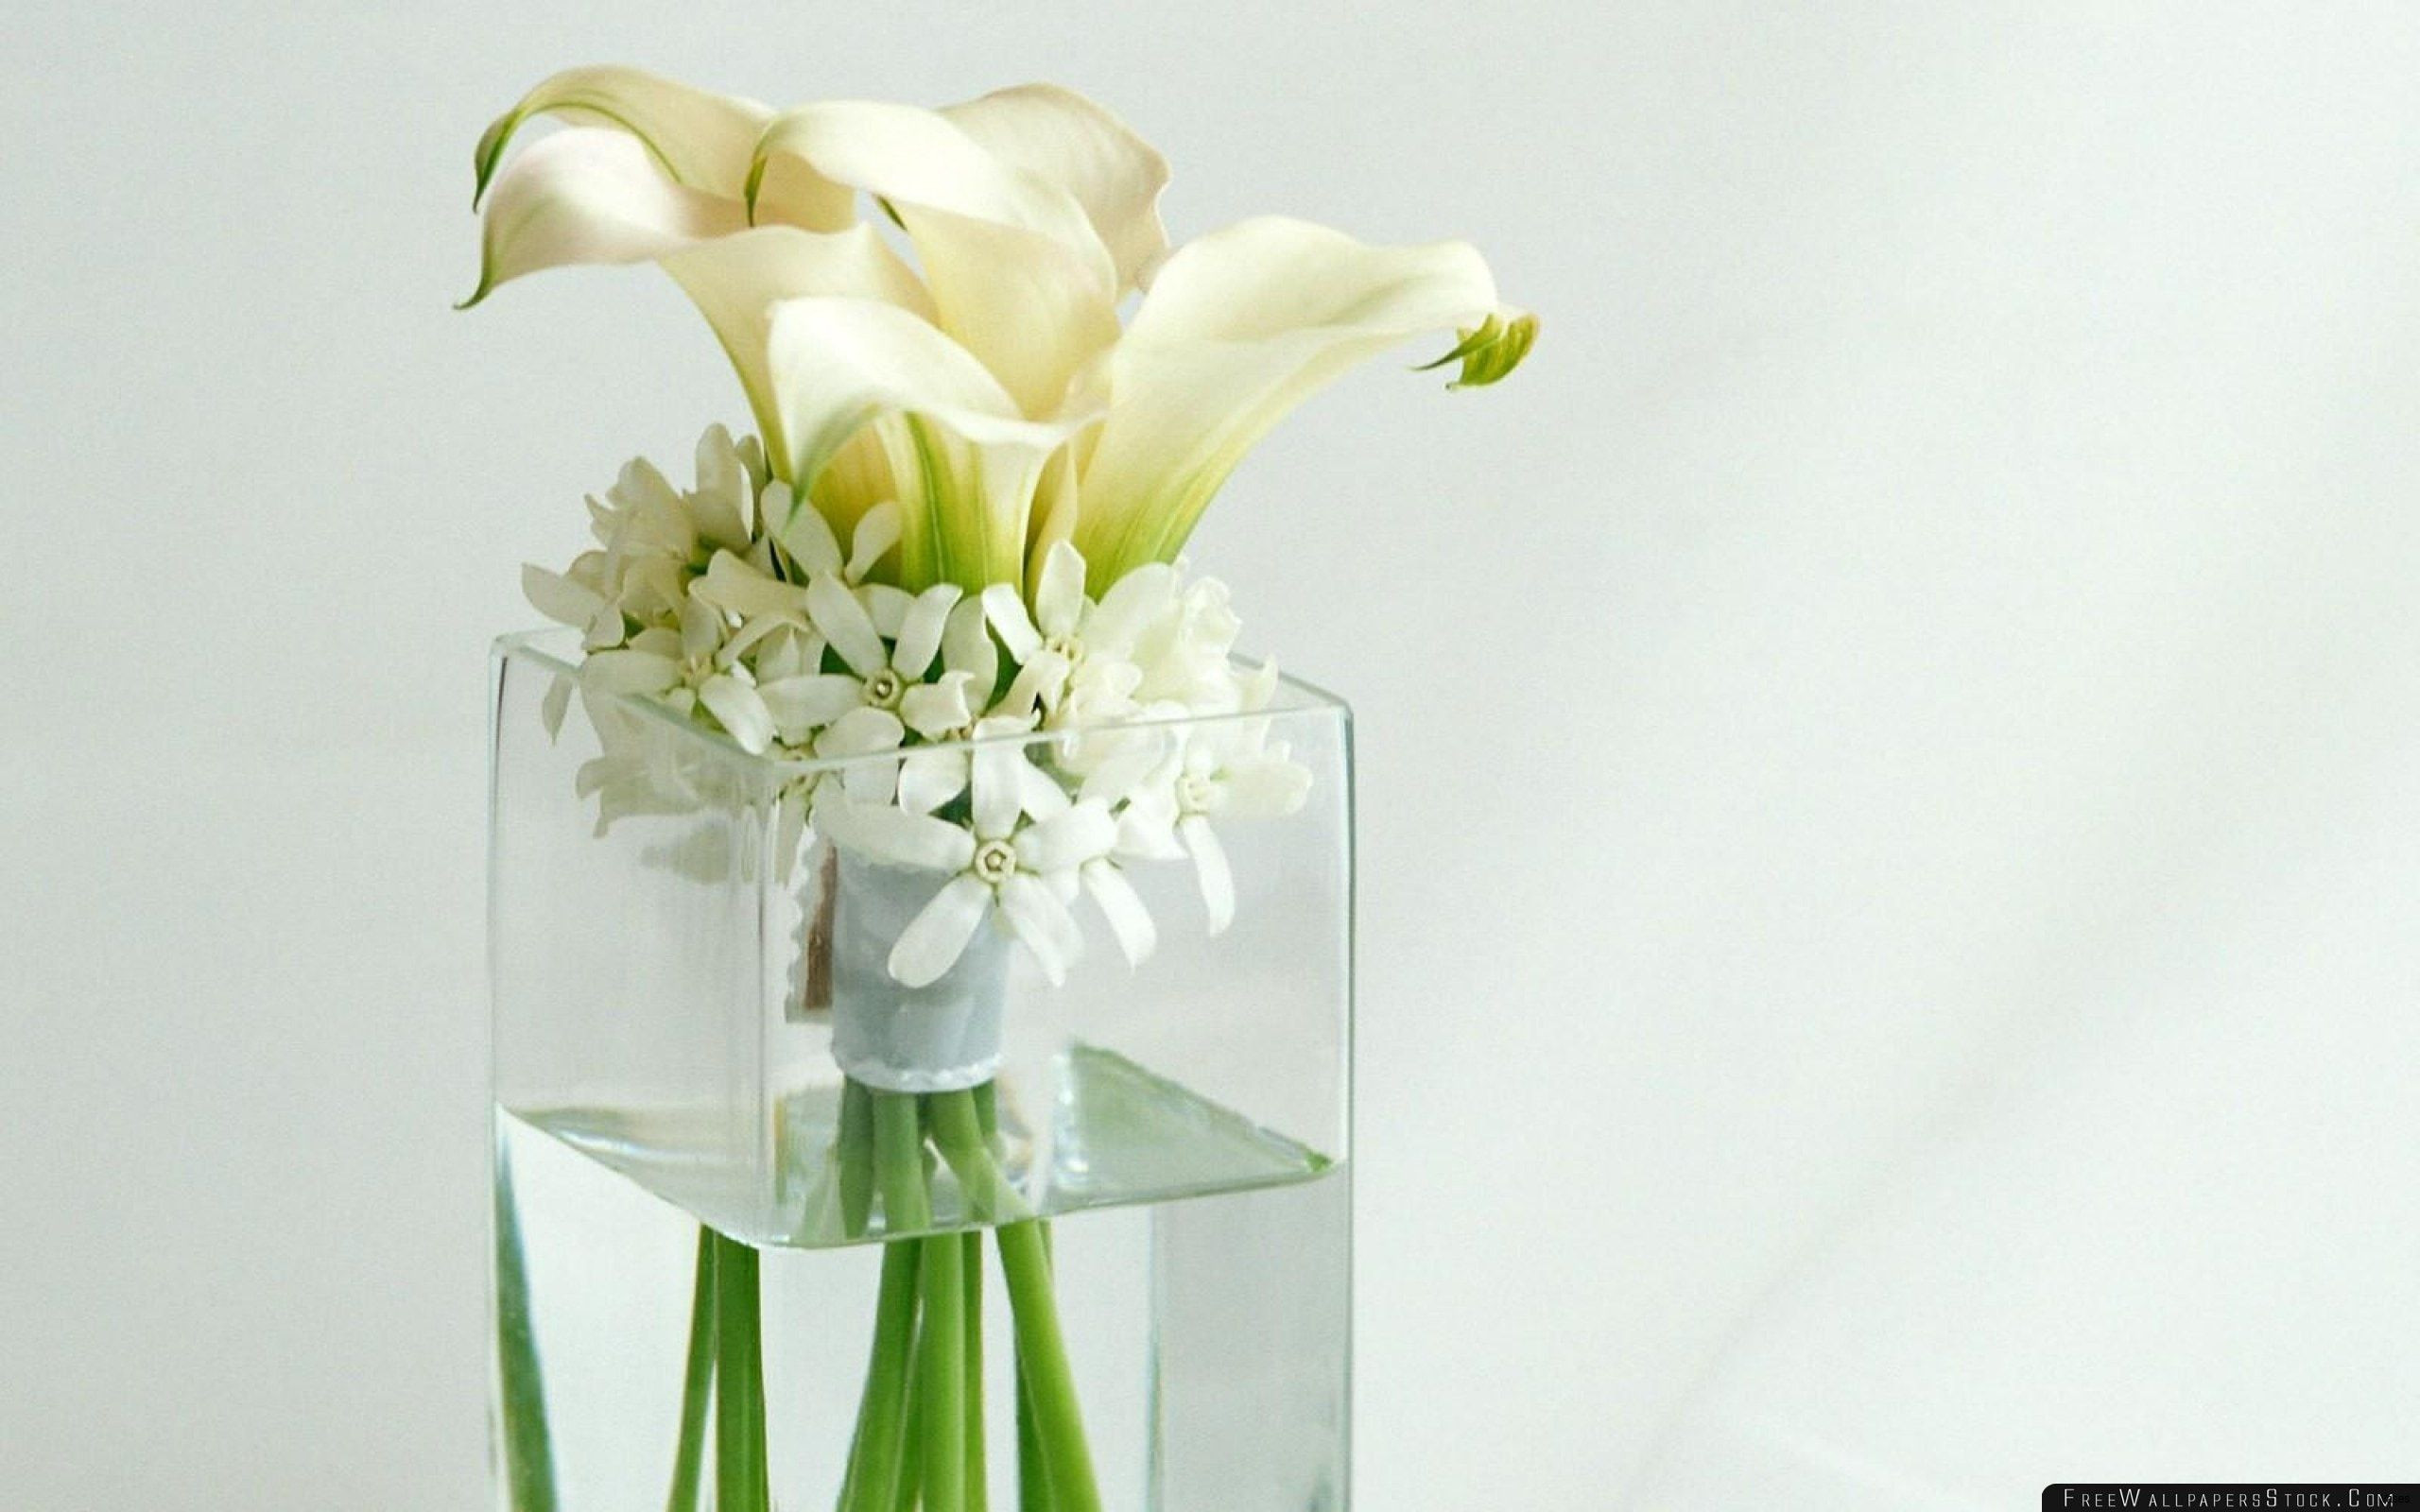 19 Unique Tall Vase Ideas 2024 free download tall vase ideas of flowers in glass vase new tall vase centerpiece ideas vases flowers inside flowers in glass vase new tall vase centerpiece ideas vases flowers in water 0d artificial